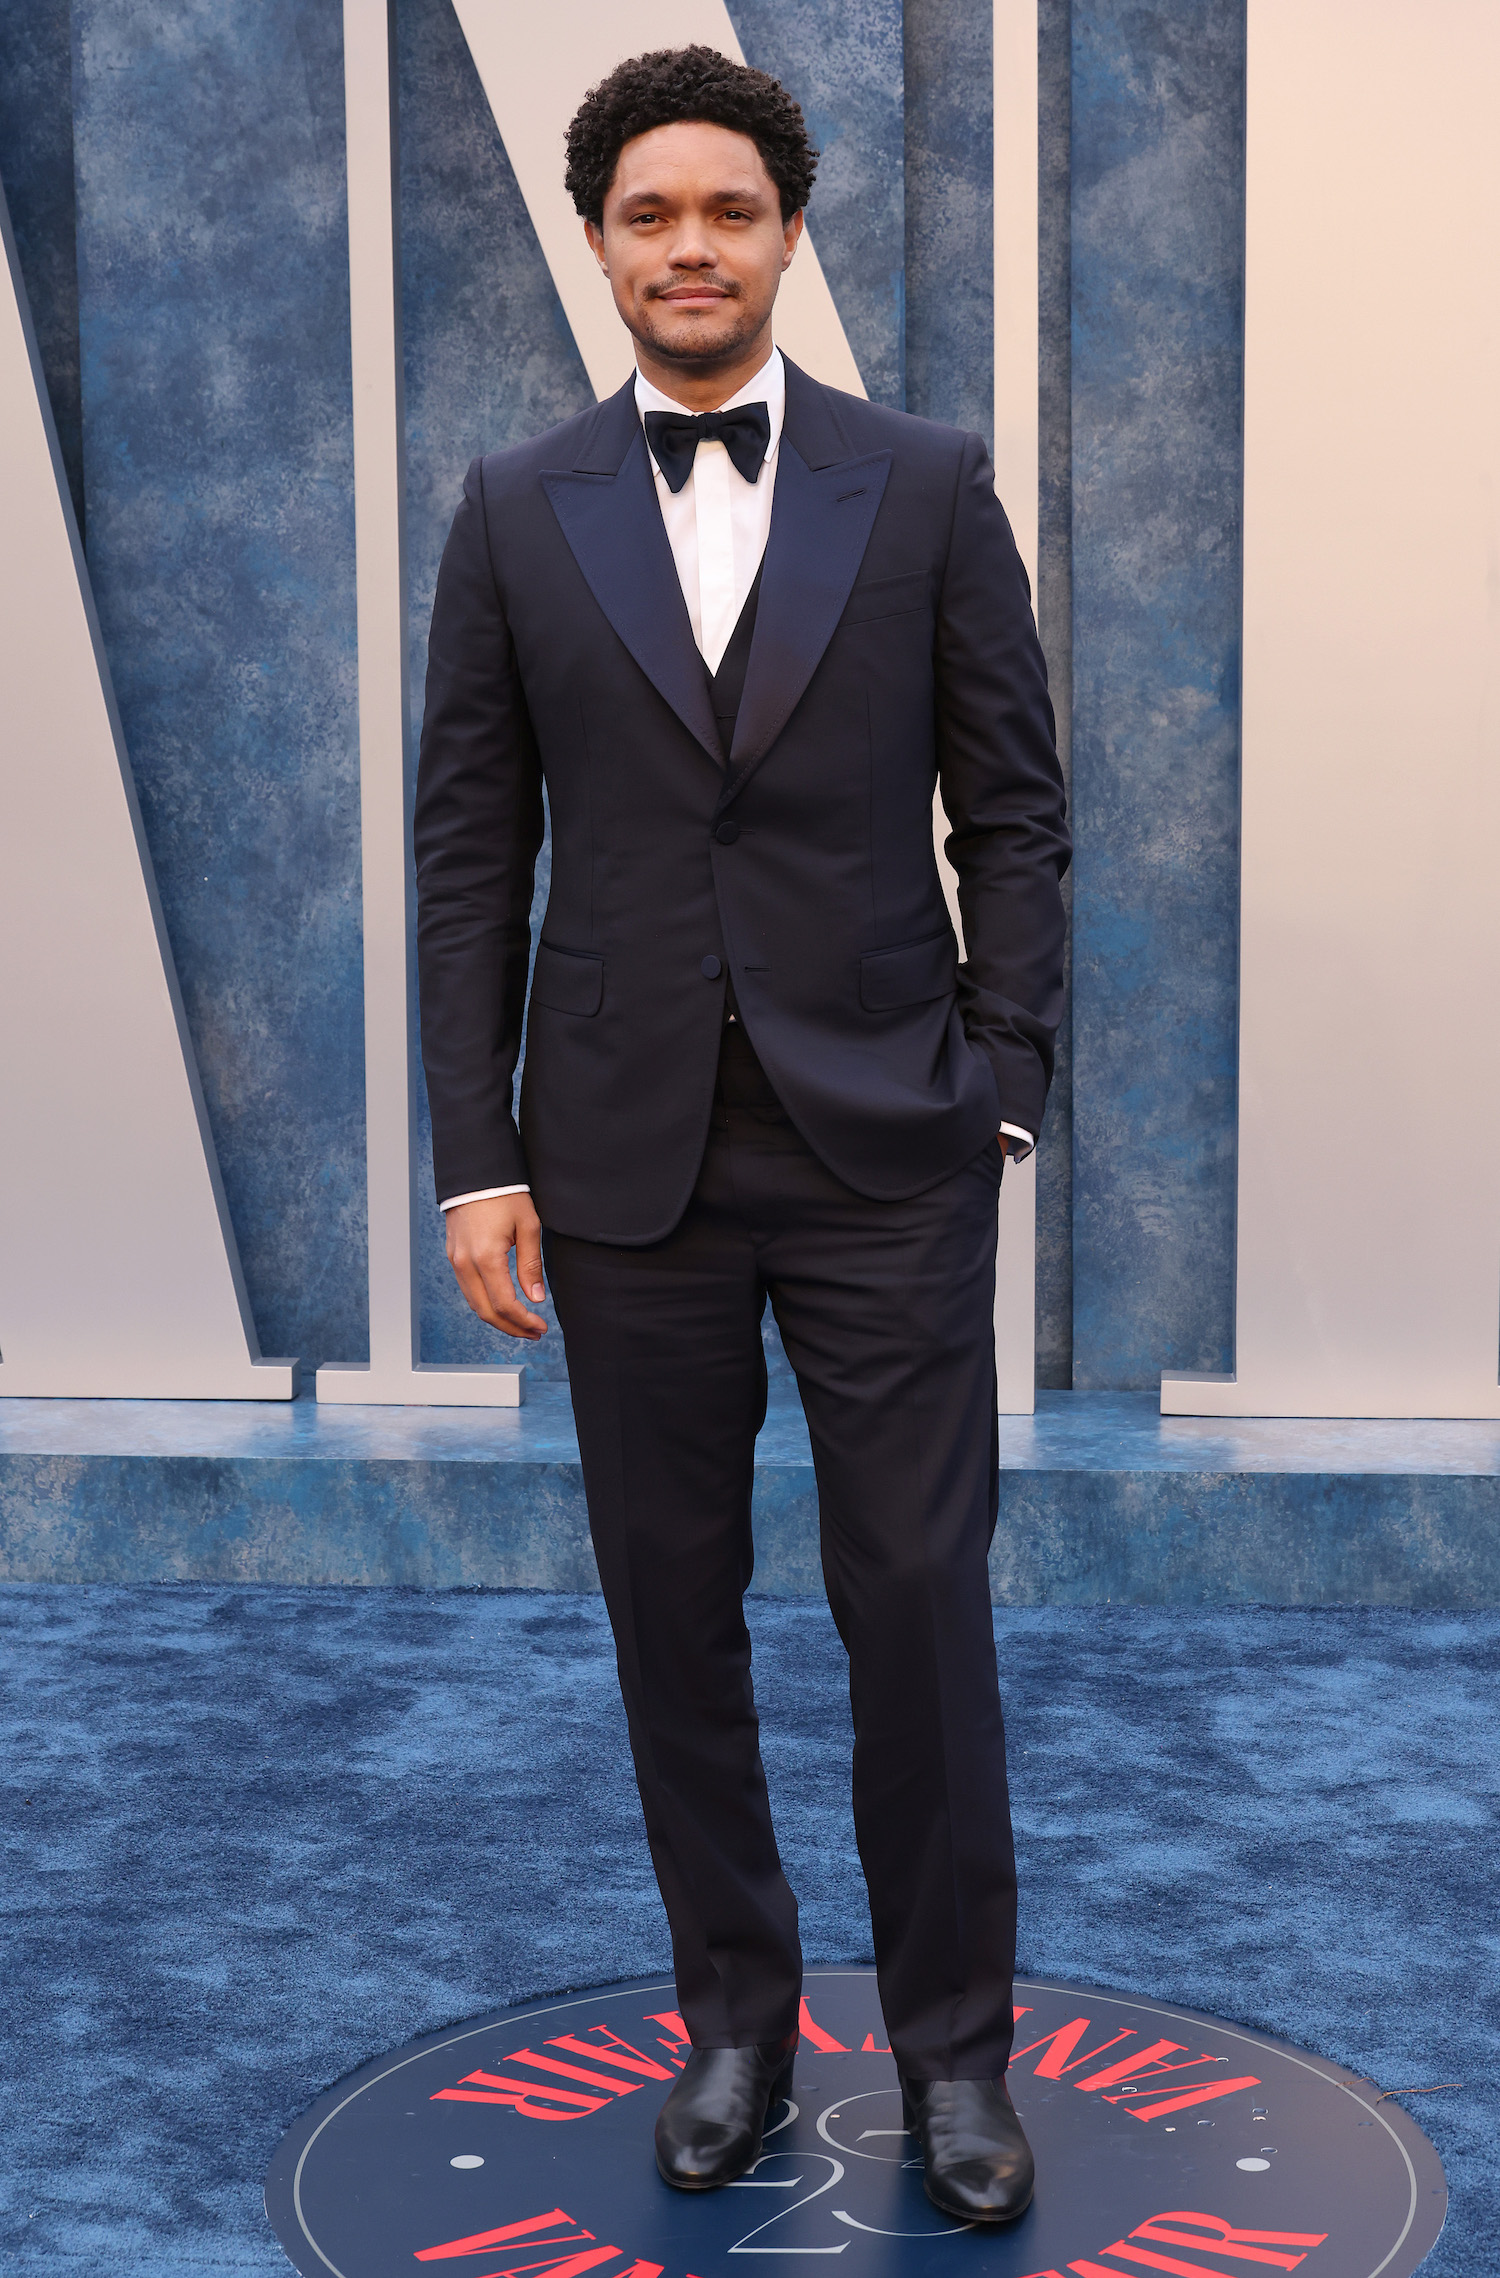 Trevor Noah wore a navy Gucci three-piece tuxedo, white evening shirt, black bowtie, and black leather boots.